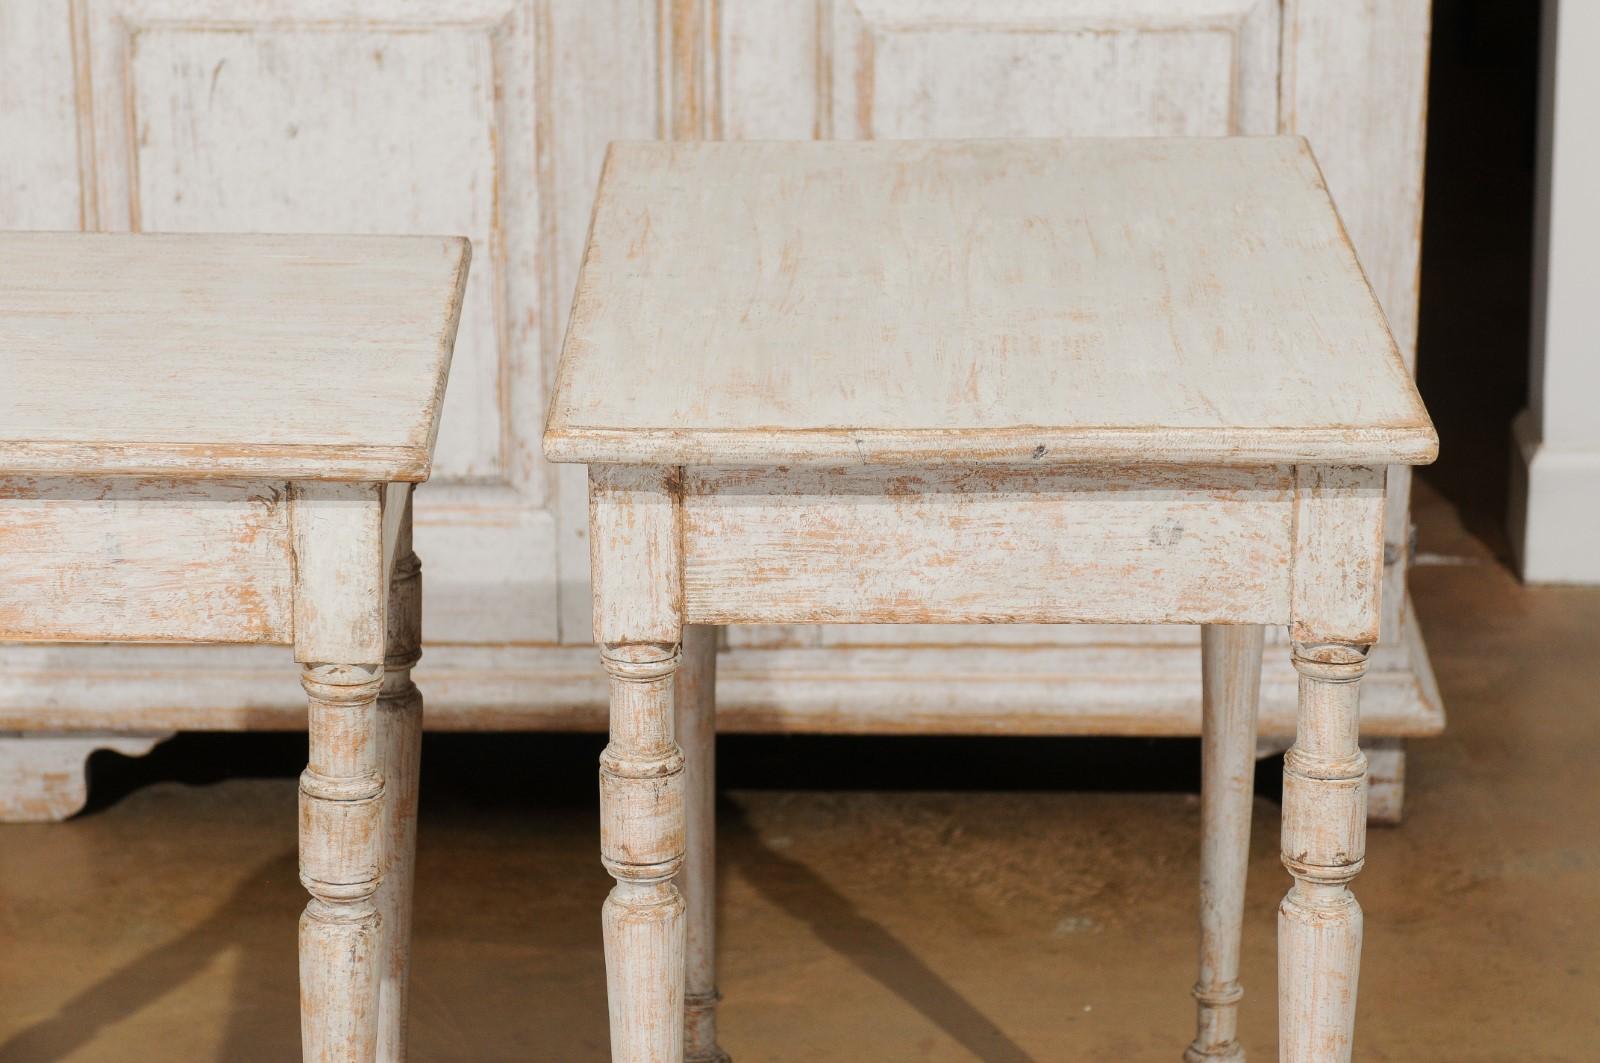 Pair of Swedish 19th Century Tables with Turned Legs and Distressed Finish 2